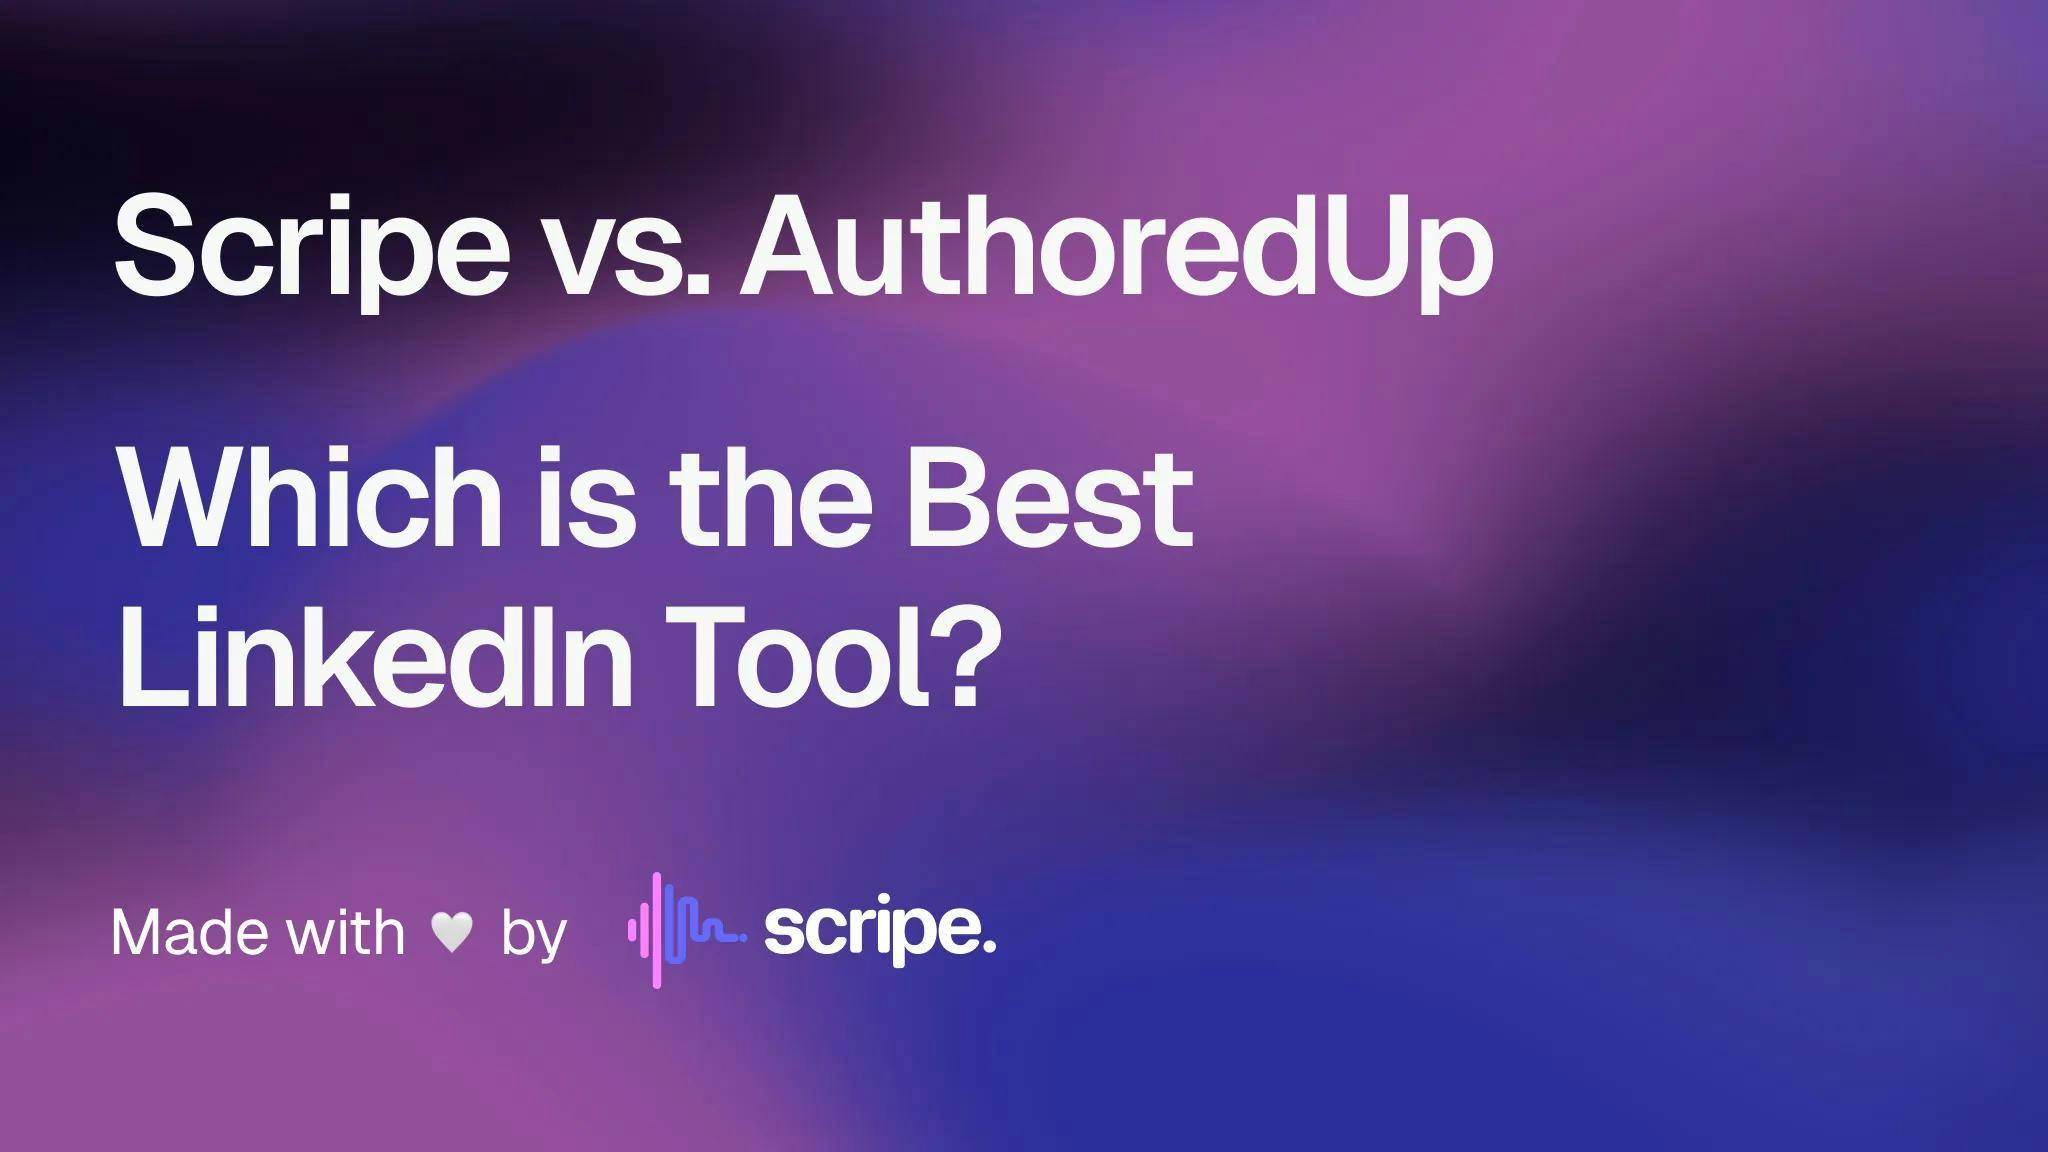 Scripe vs. AuthoredUp: Which is the Best LinkedIn Tool?